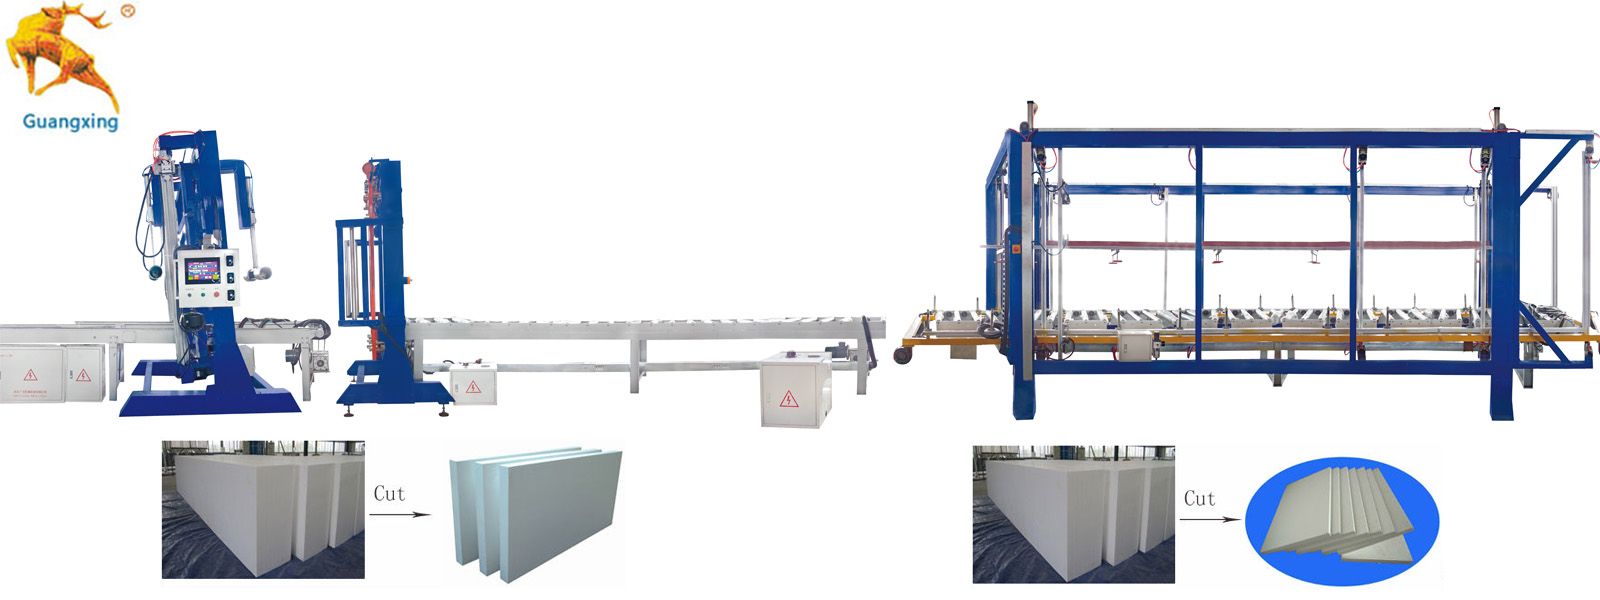 Automatic-EPS-Block-Cutting-Line